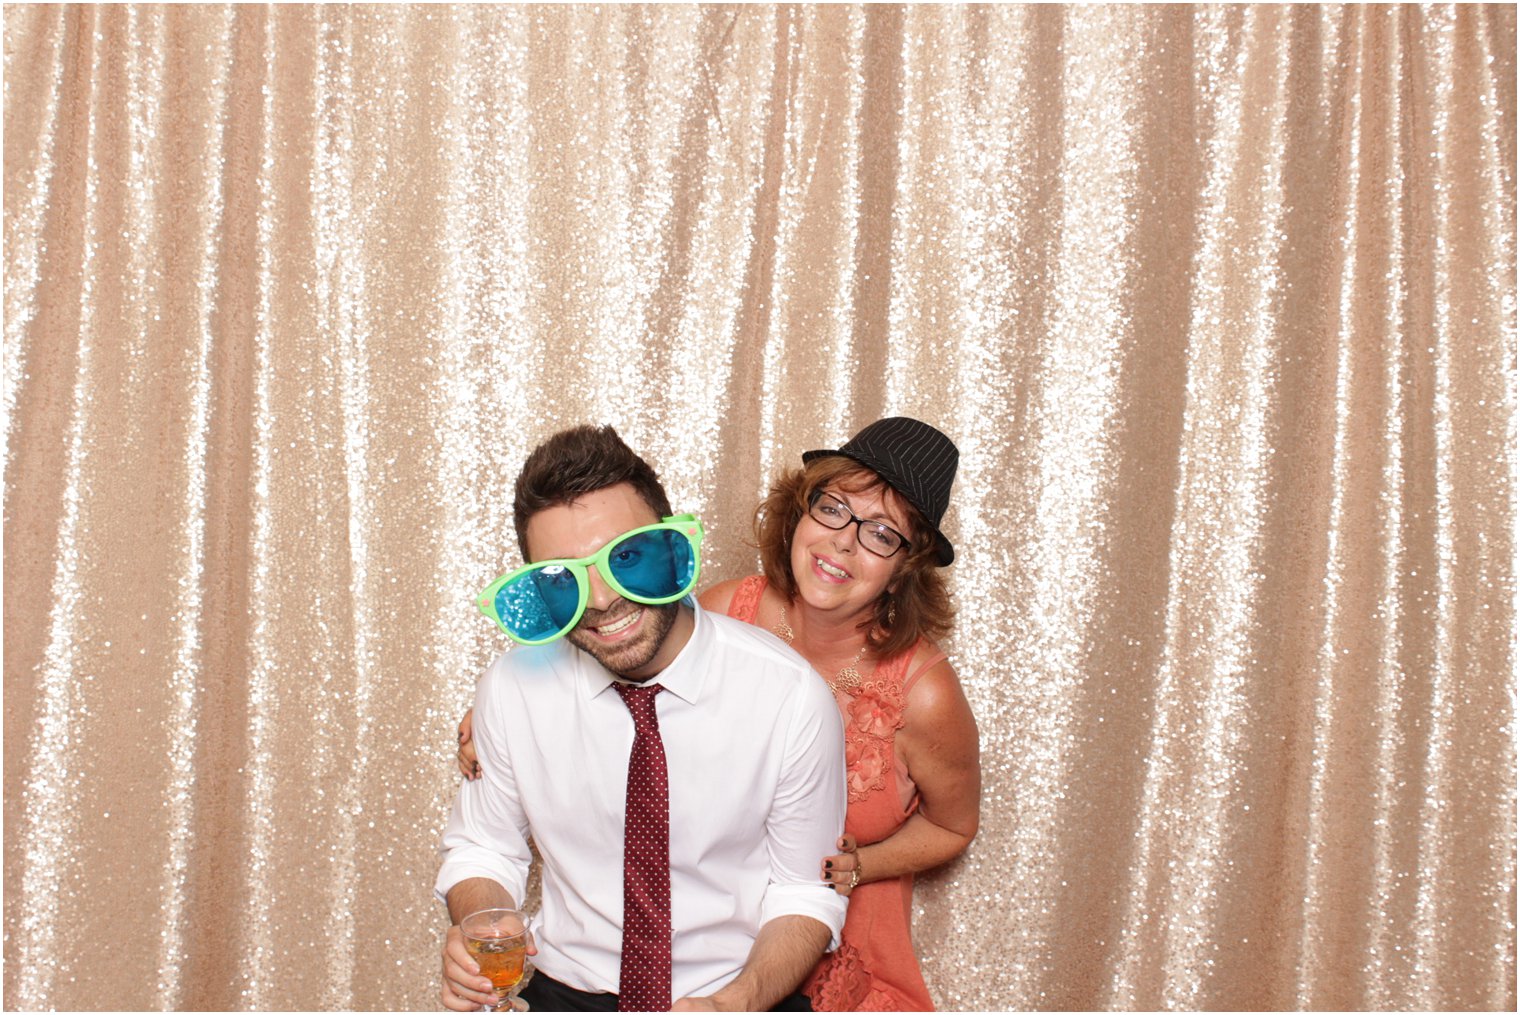 Eastern PA Photo Booth Rental